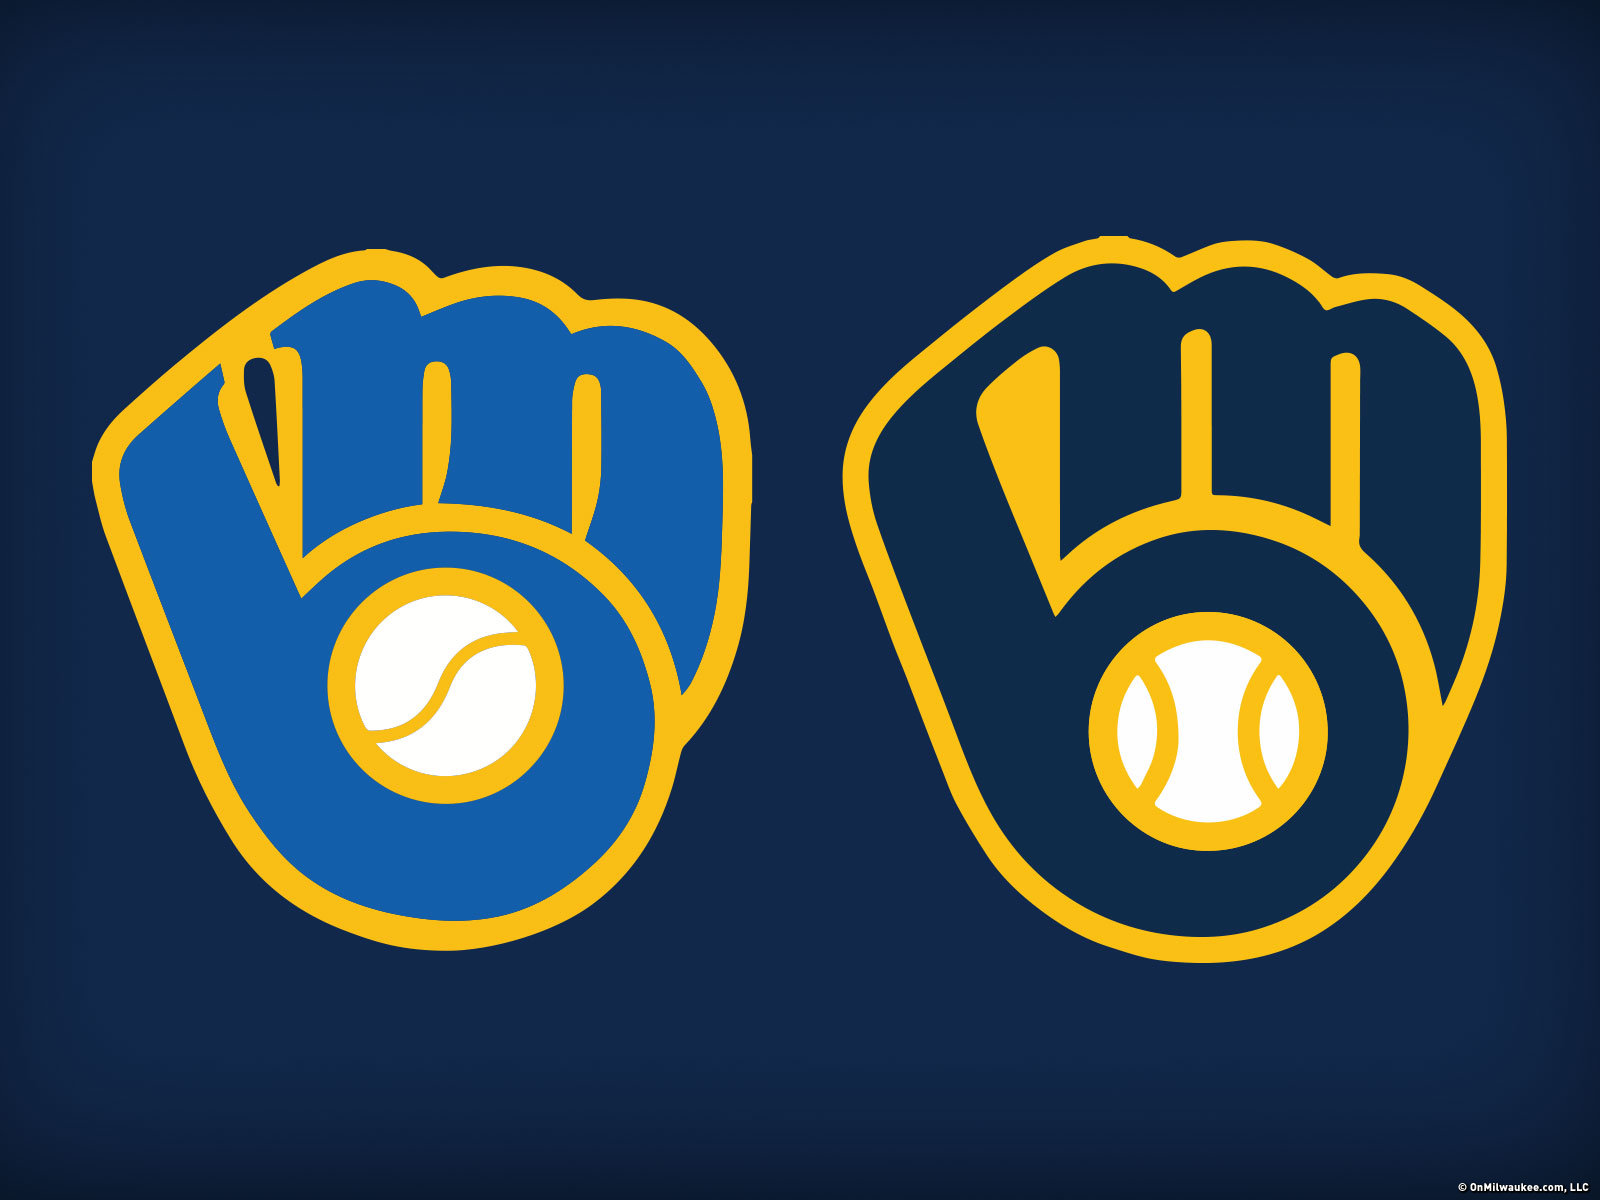 Here's a comparison of the old and new Brewers uniforms : r/baseball